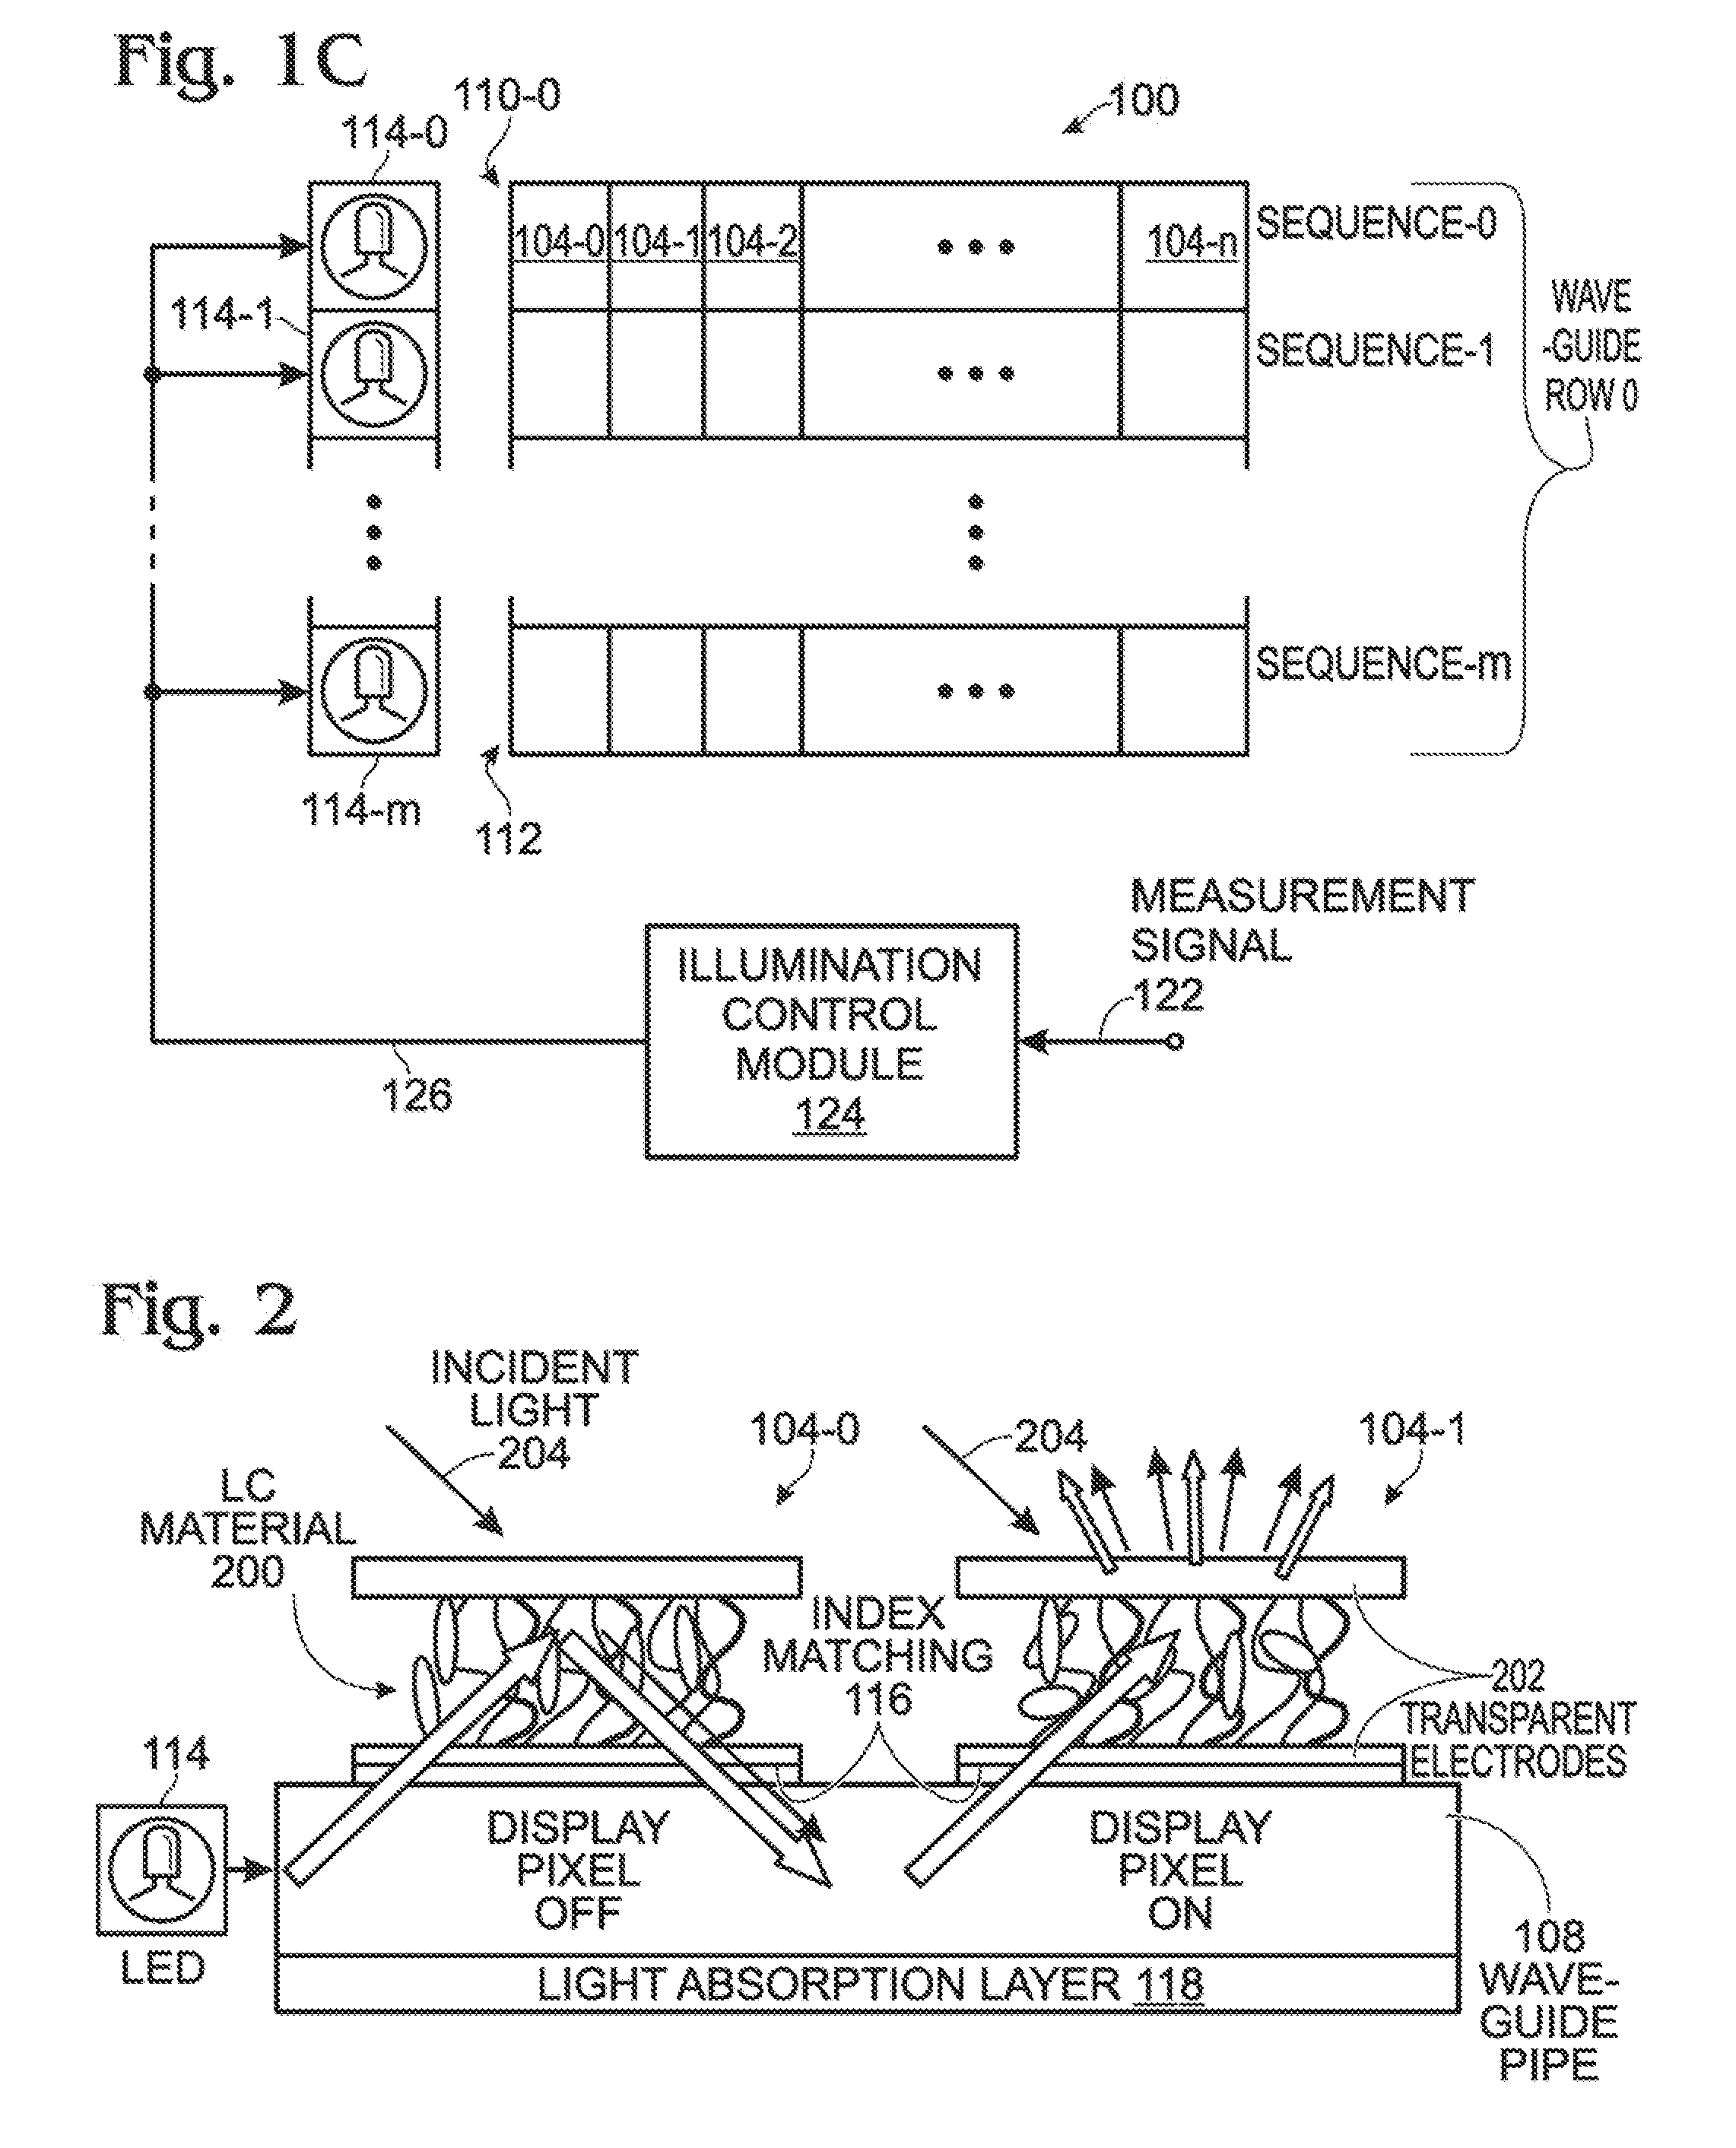 Scattering Tunable Display Using Reflective and Transmissive Modes of Illumination